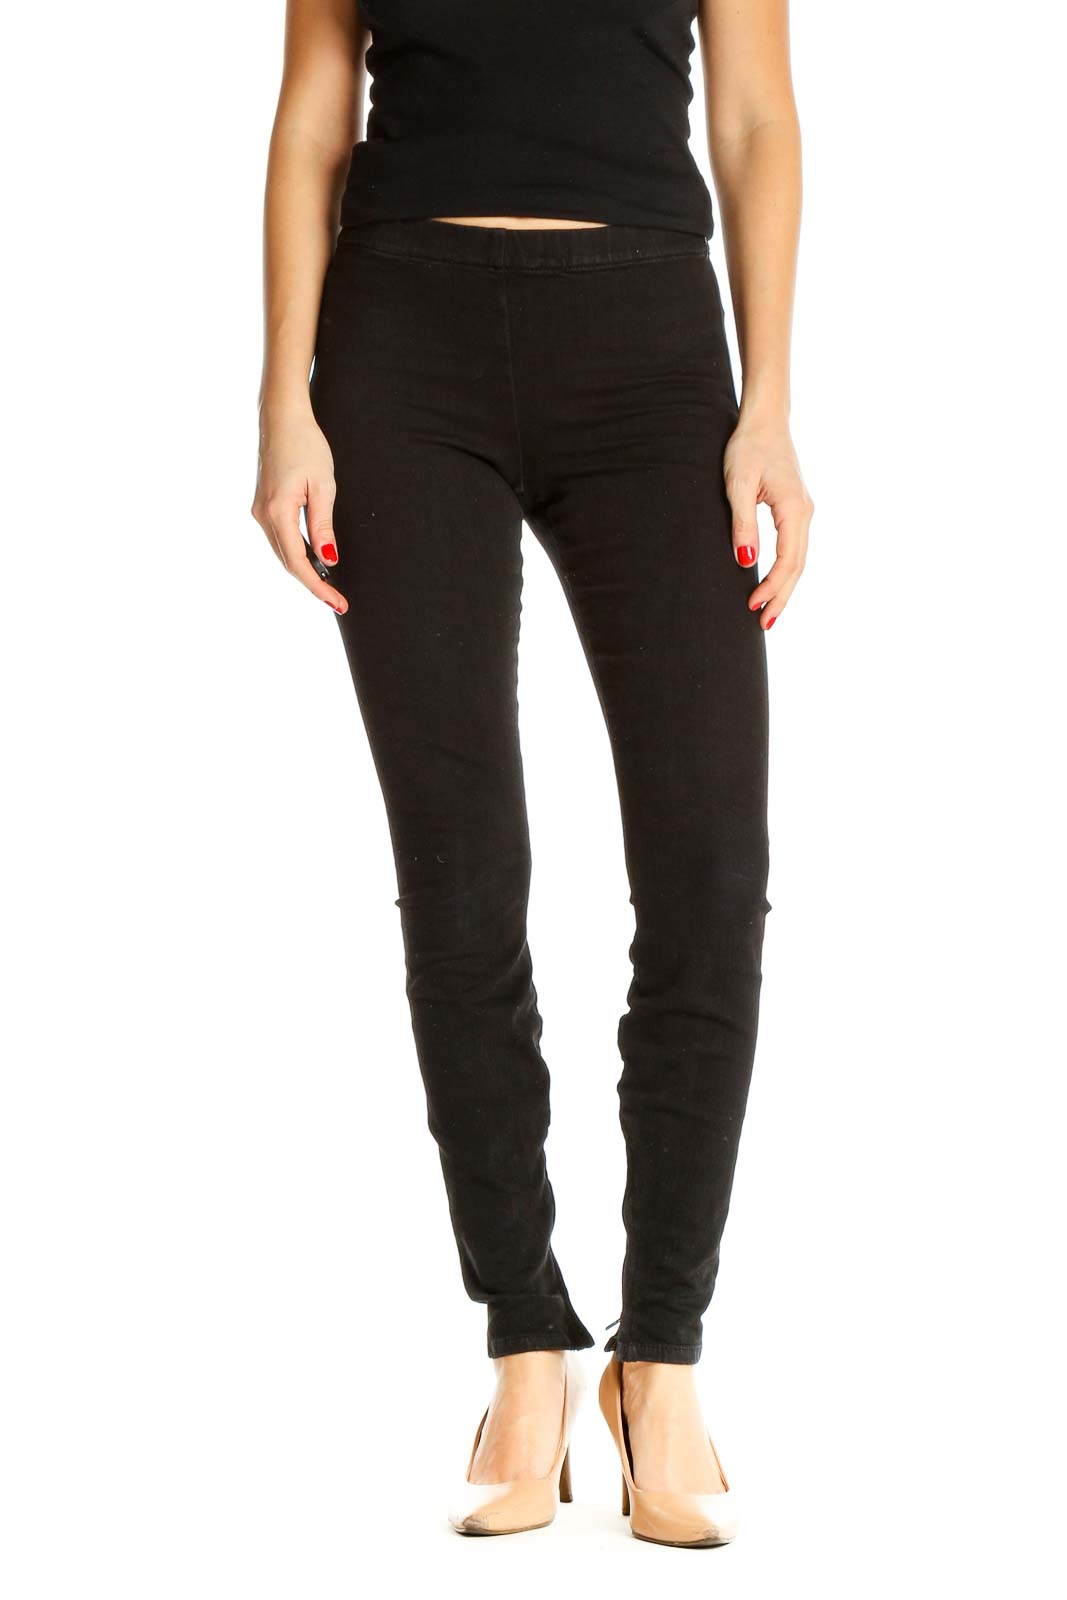 Black Solid All Day Wear Leggings Front